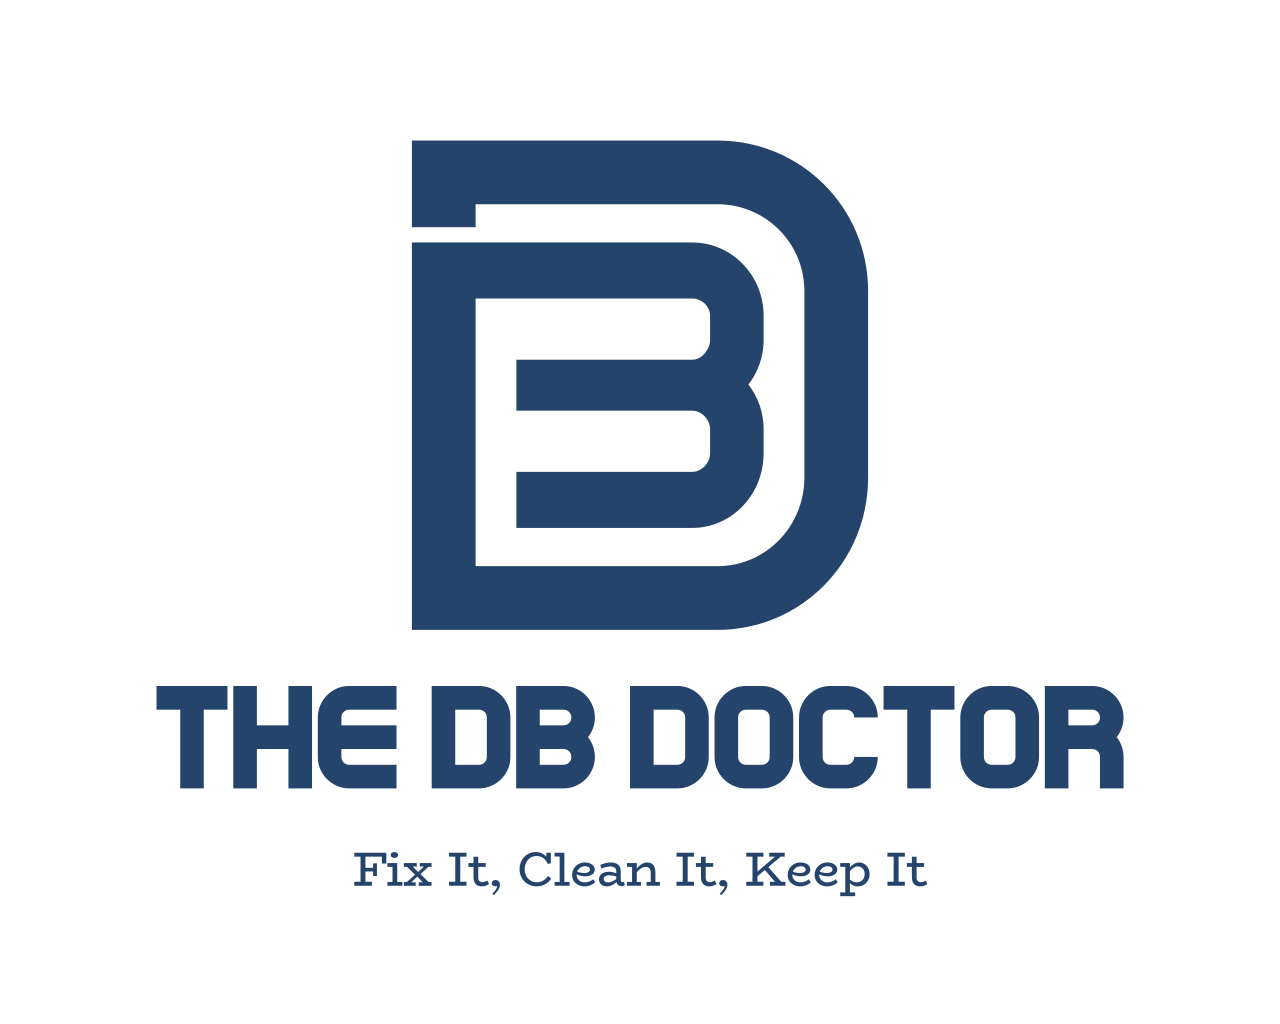 The DB Doctor